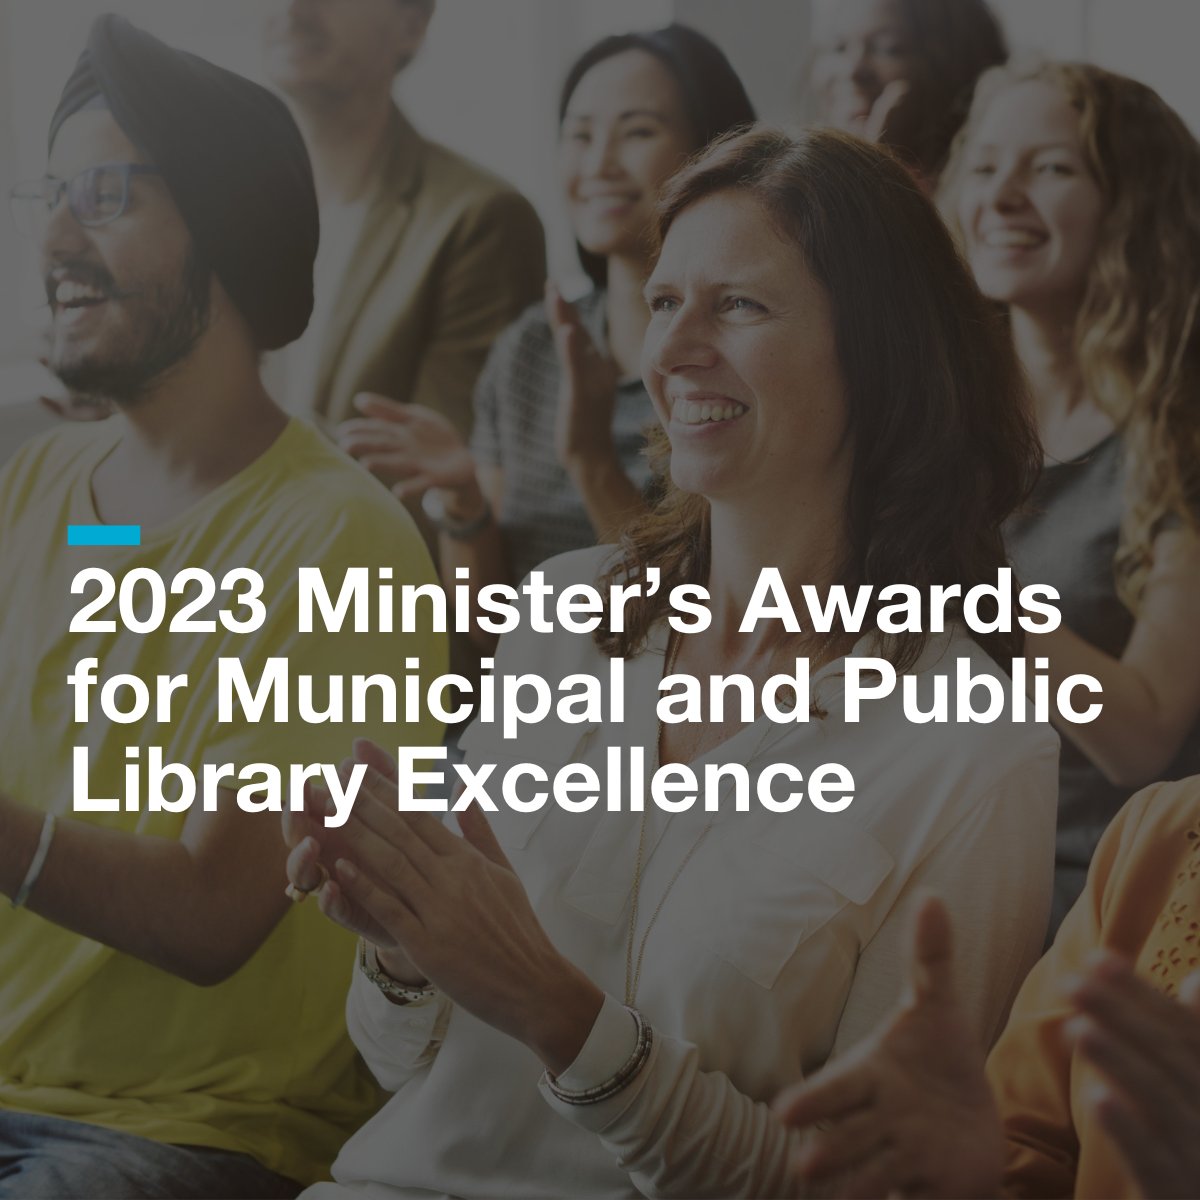 Congratulations to the 10 outstanding recipients of the 2023 Minister’s Awards for Municipal and Public Library Excellence! Meet the award recipients and check out their videos: Municipal winners - alberta.ca/ministers-awar… Library board winners - alberta.ca/ministers-awar…